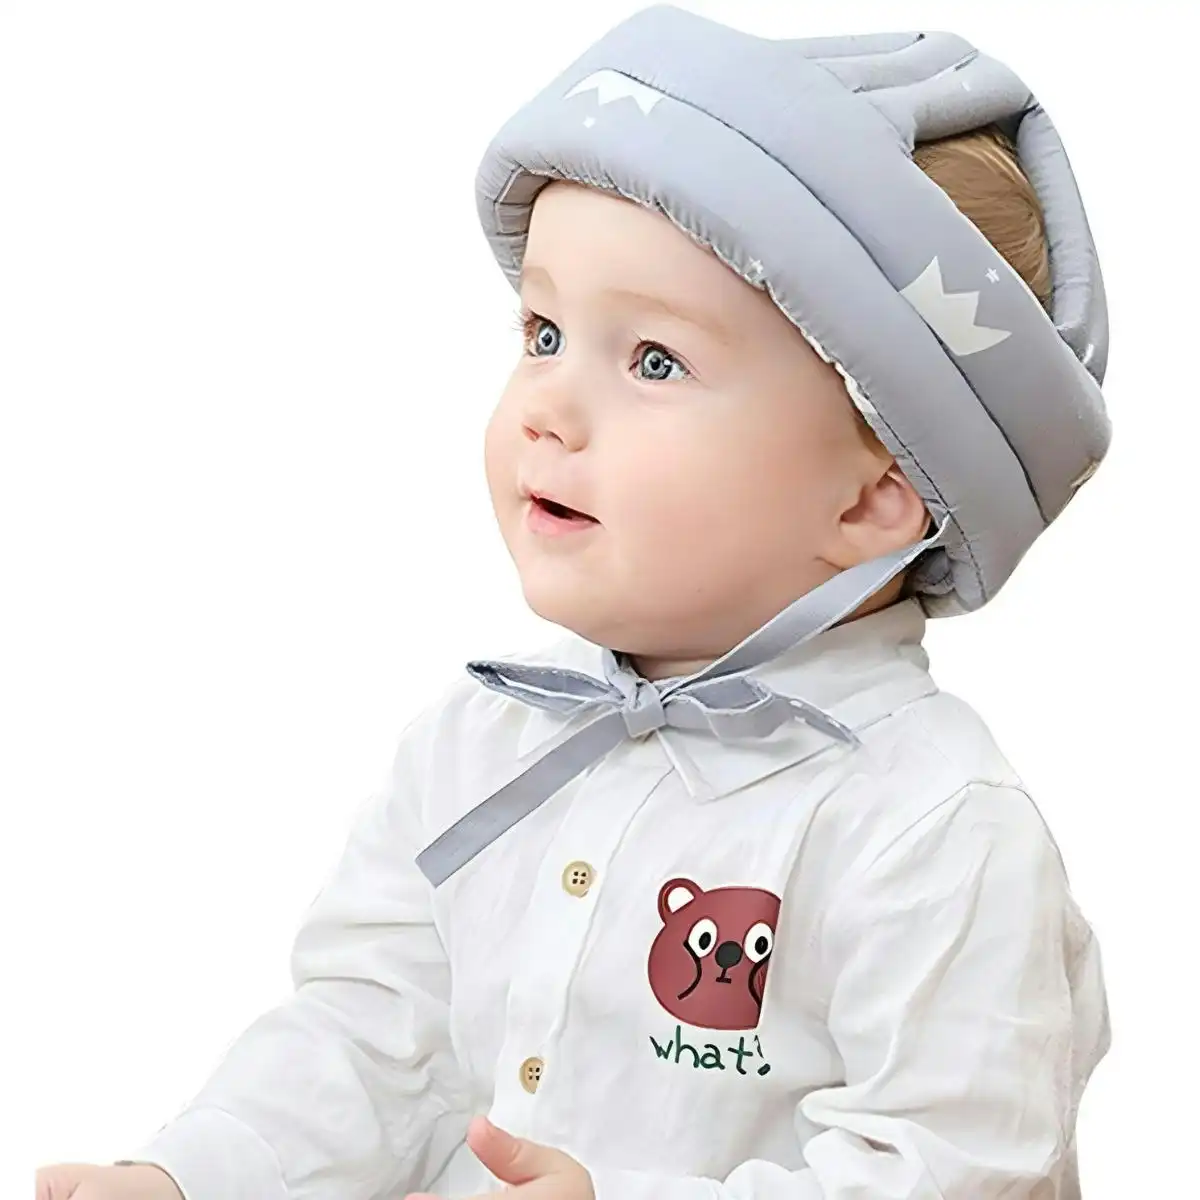 Toddly ProtectCap Baby Safety Helmet Breathable & Adjustable Head Cushion